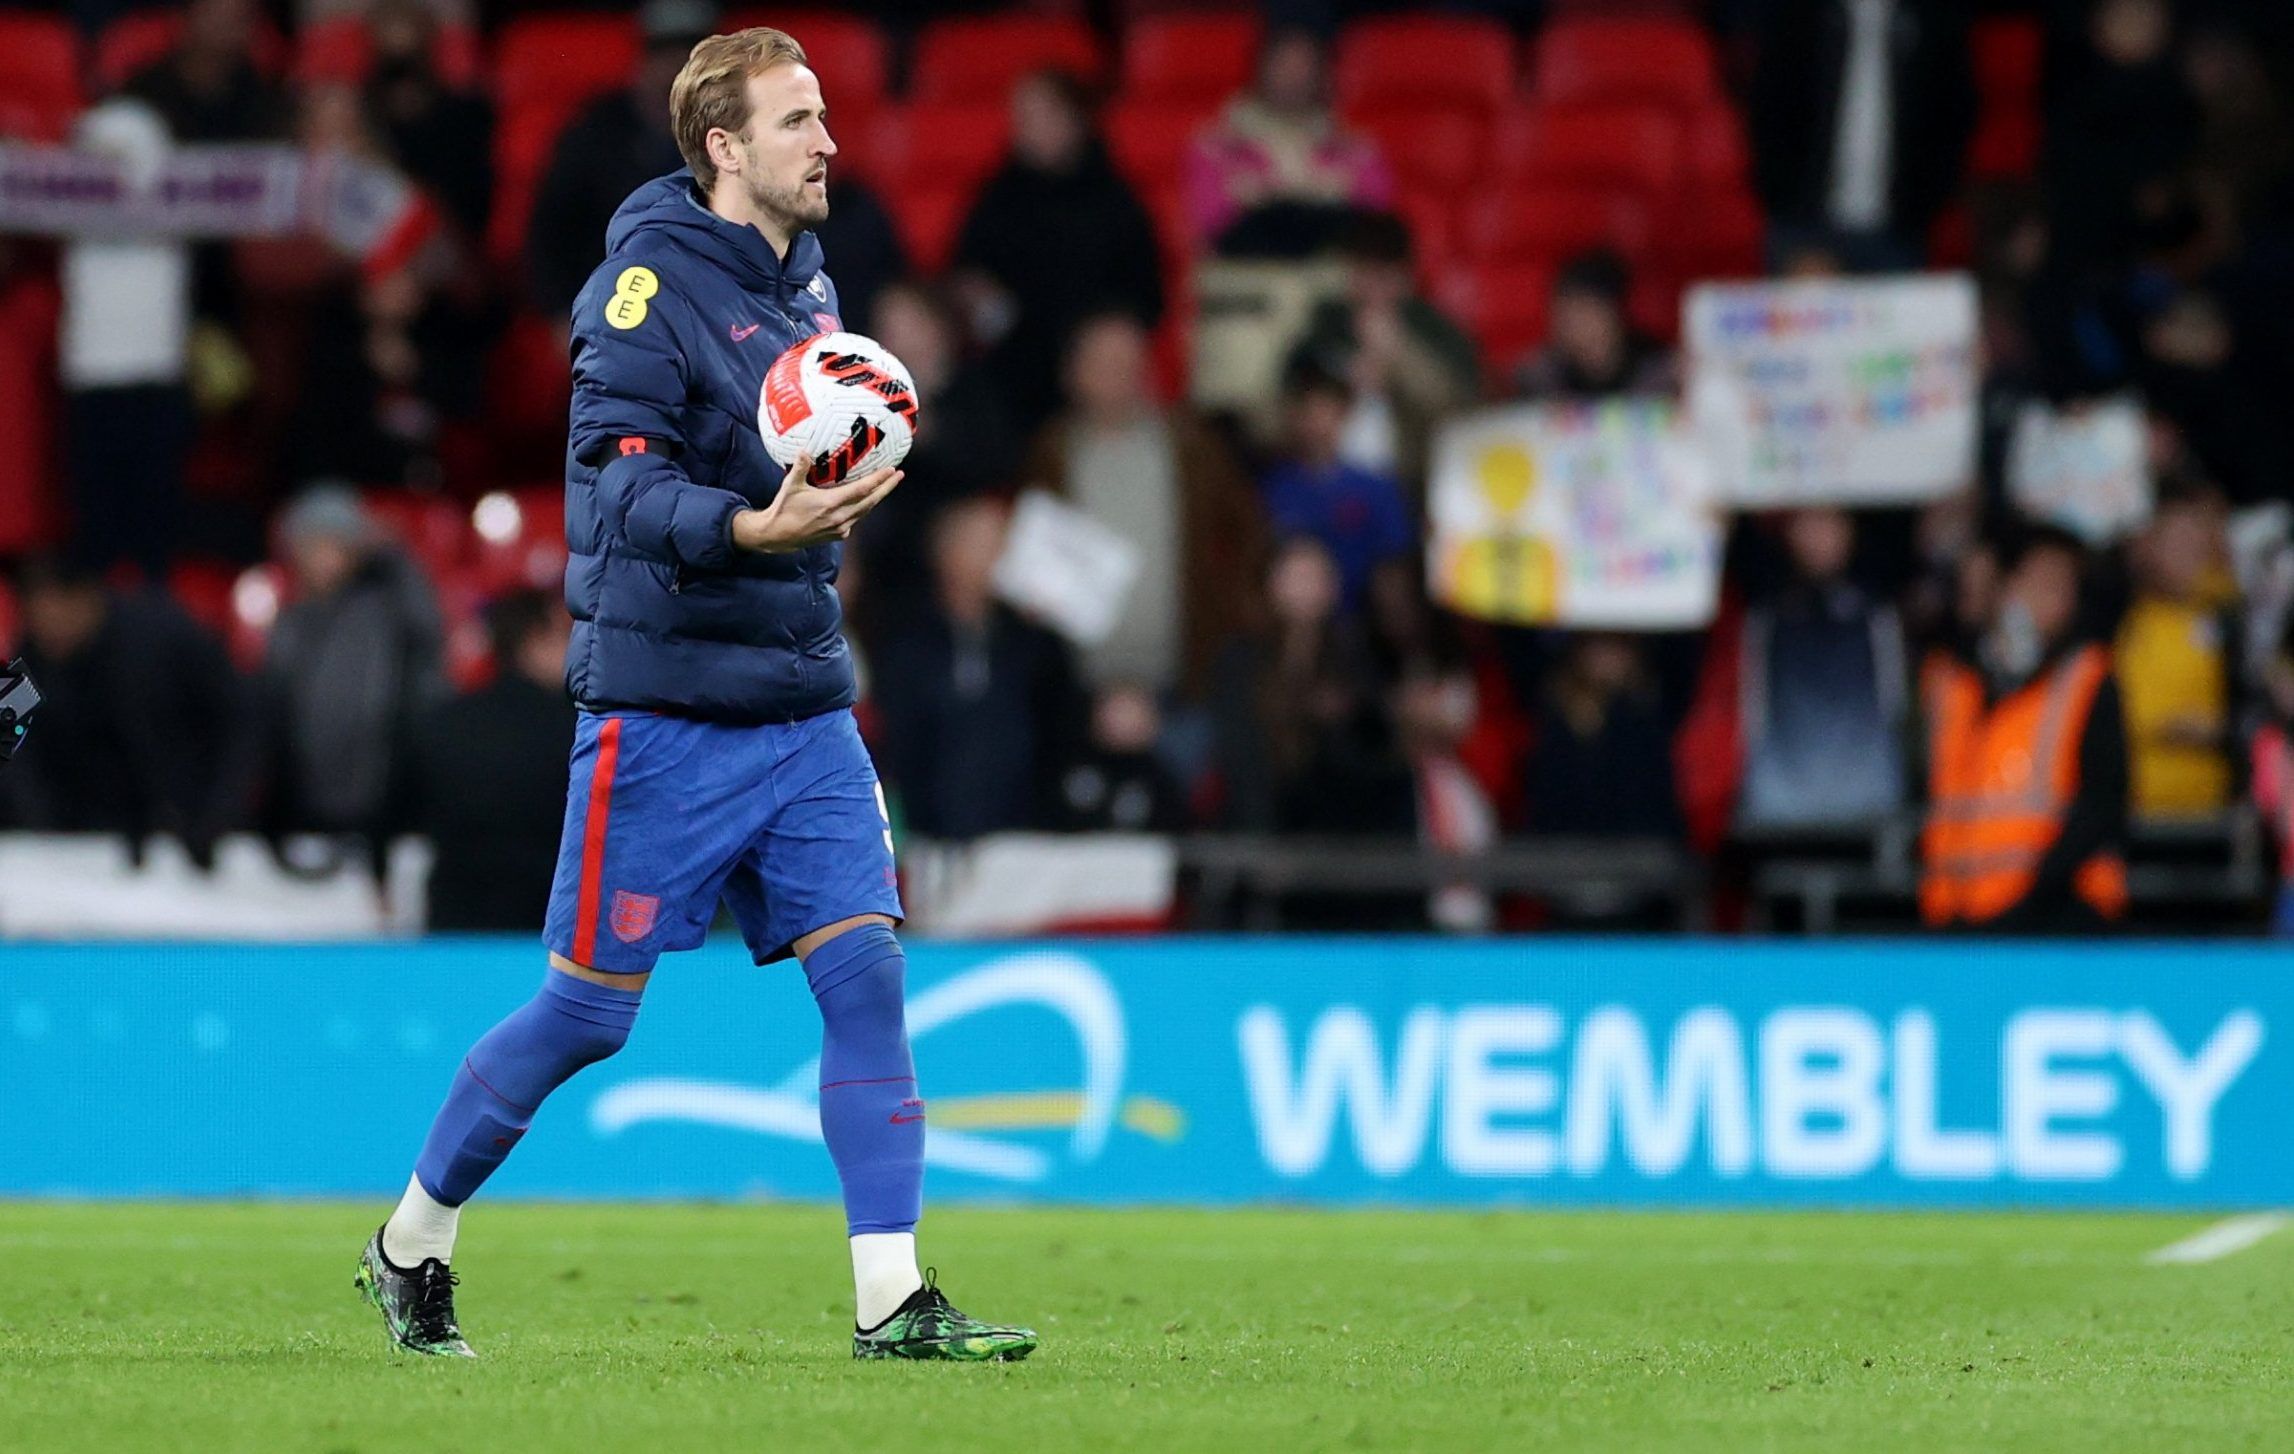 Spurs striker Harry Kane walks away with match ball after England hat-trick against Albania in World Cup qualifying